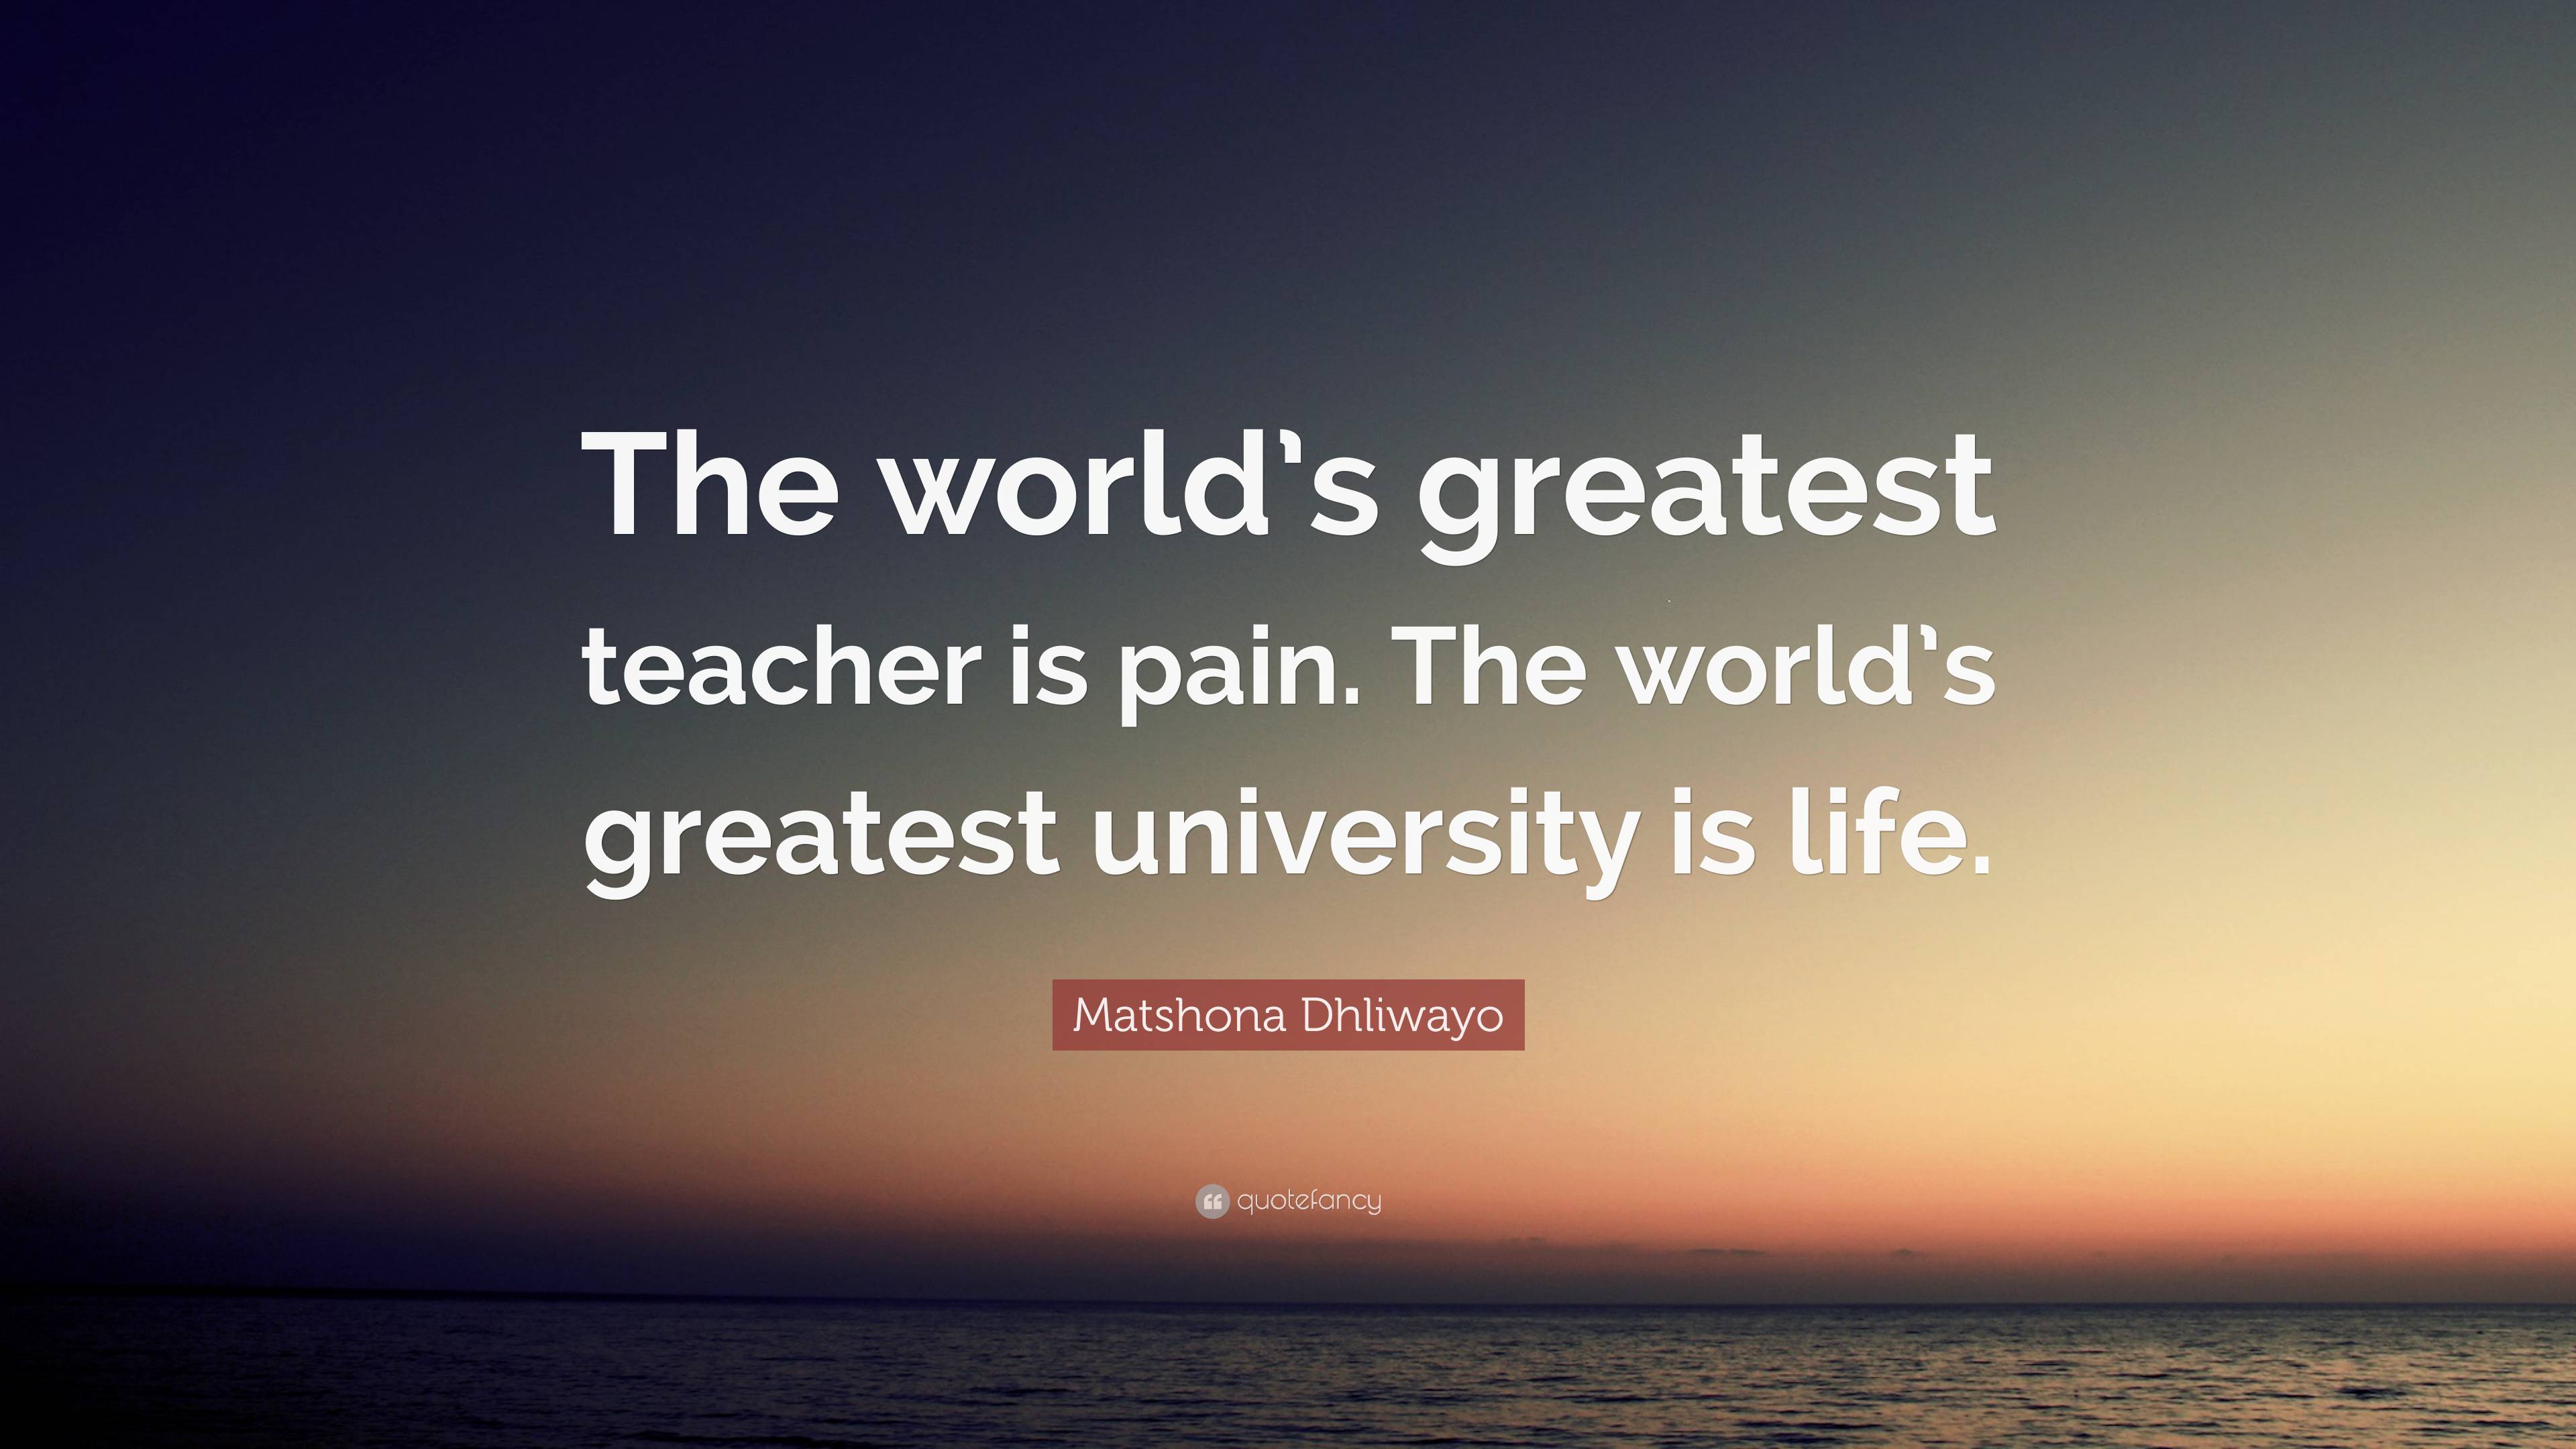 Matshona Dhliwayo Quote: “The world’s greatest teacher is pain. The ...